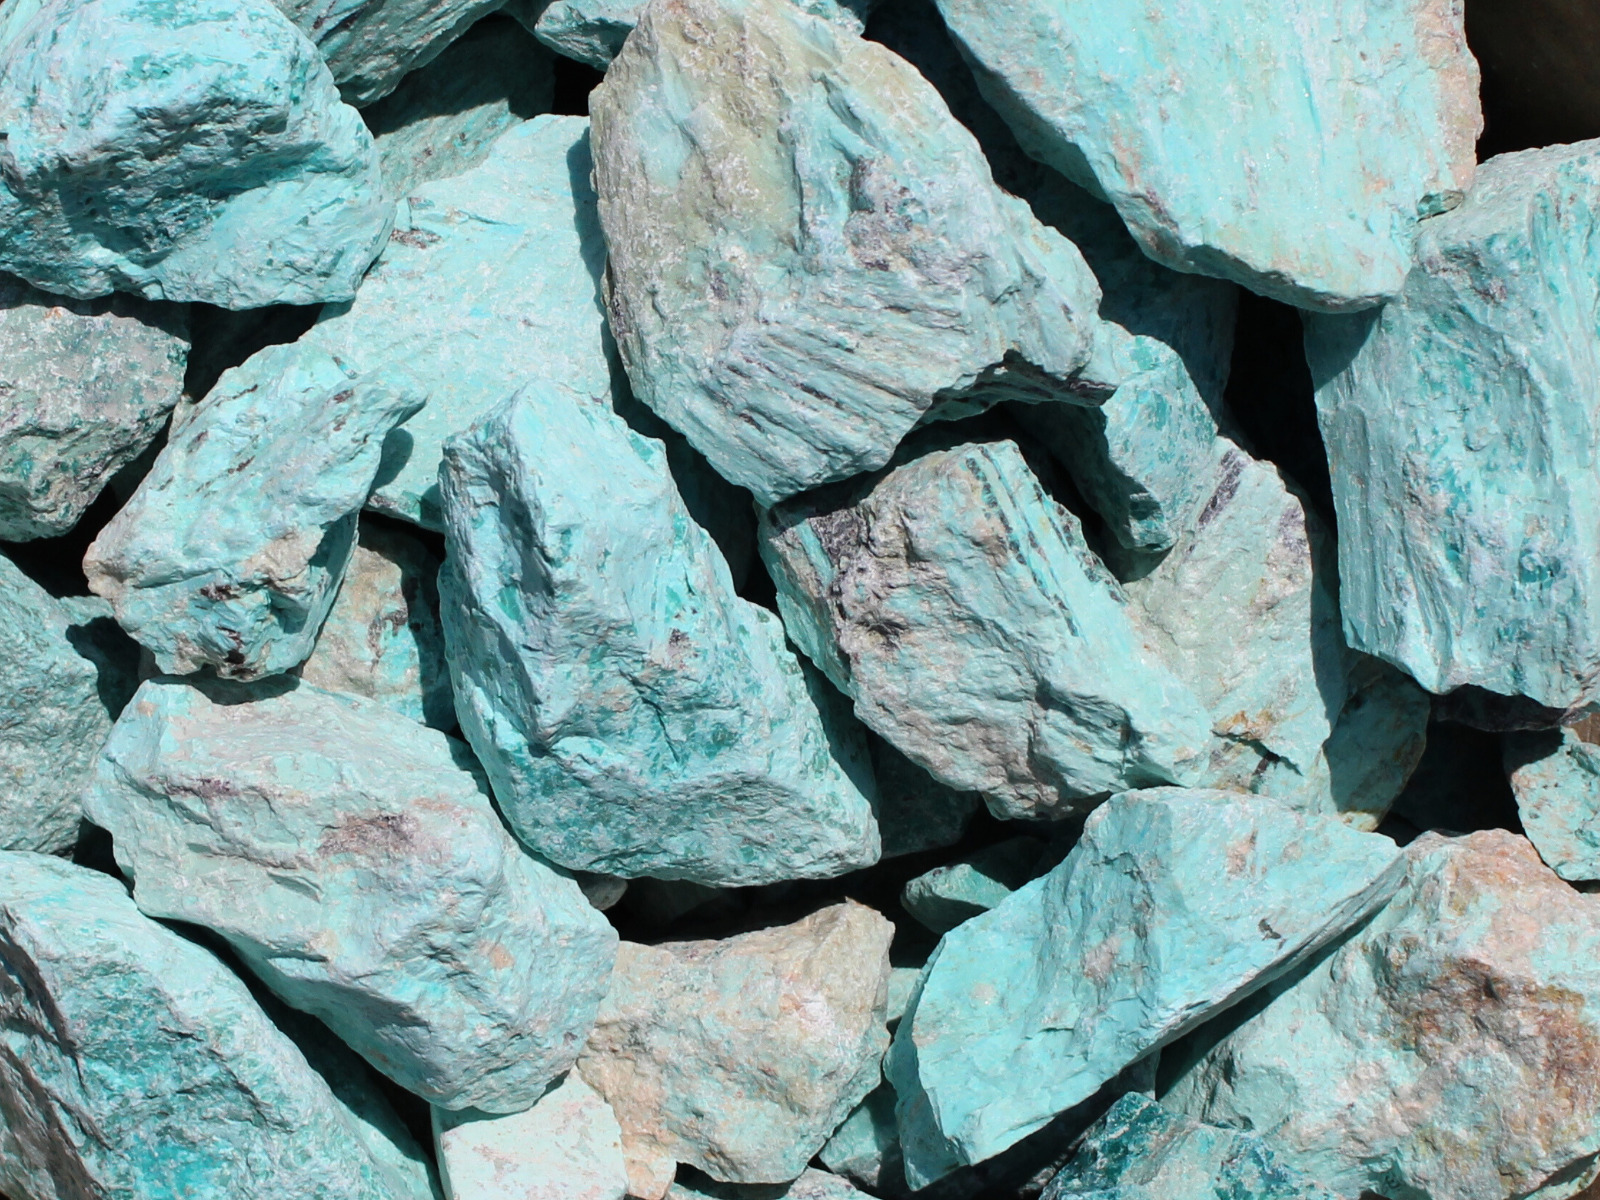 Turquoise from Peru - Rough Rocks for Jewelry, Decor, Cabochons -Bulk Wholesale